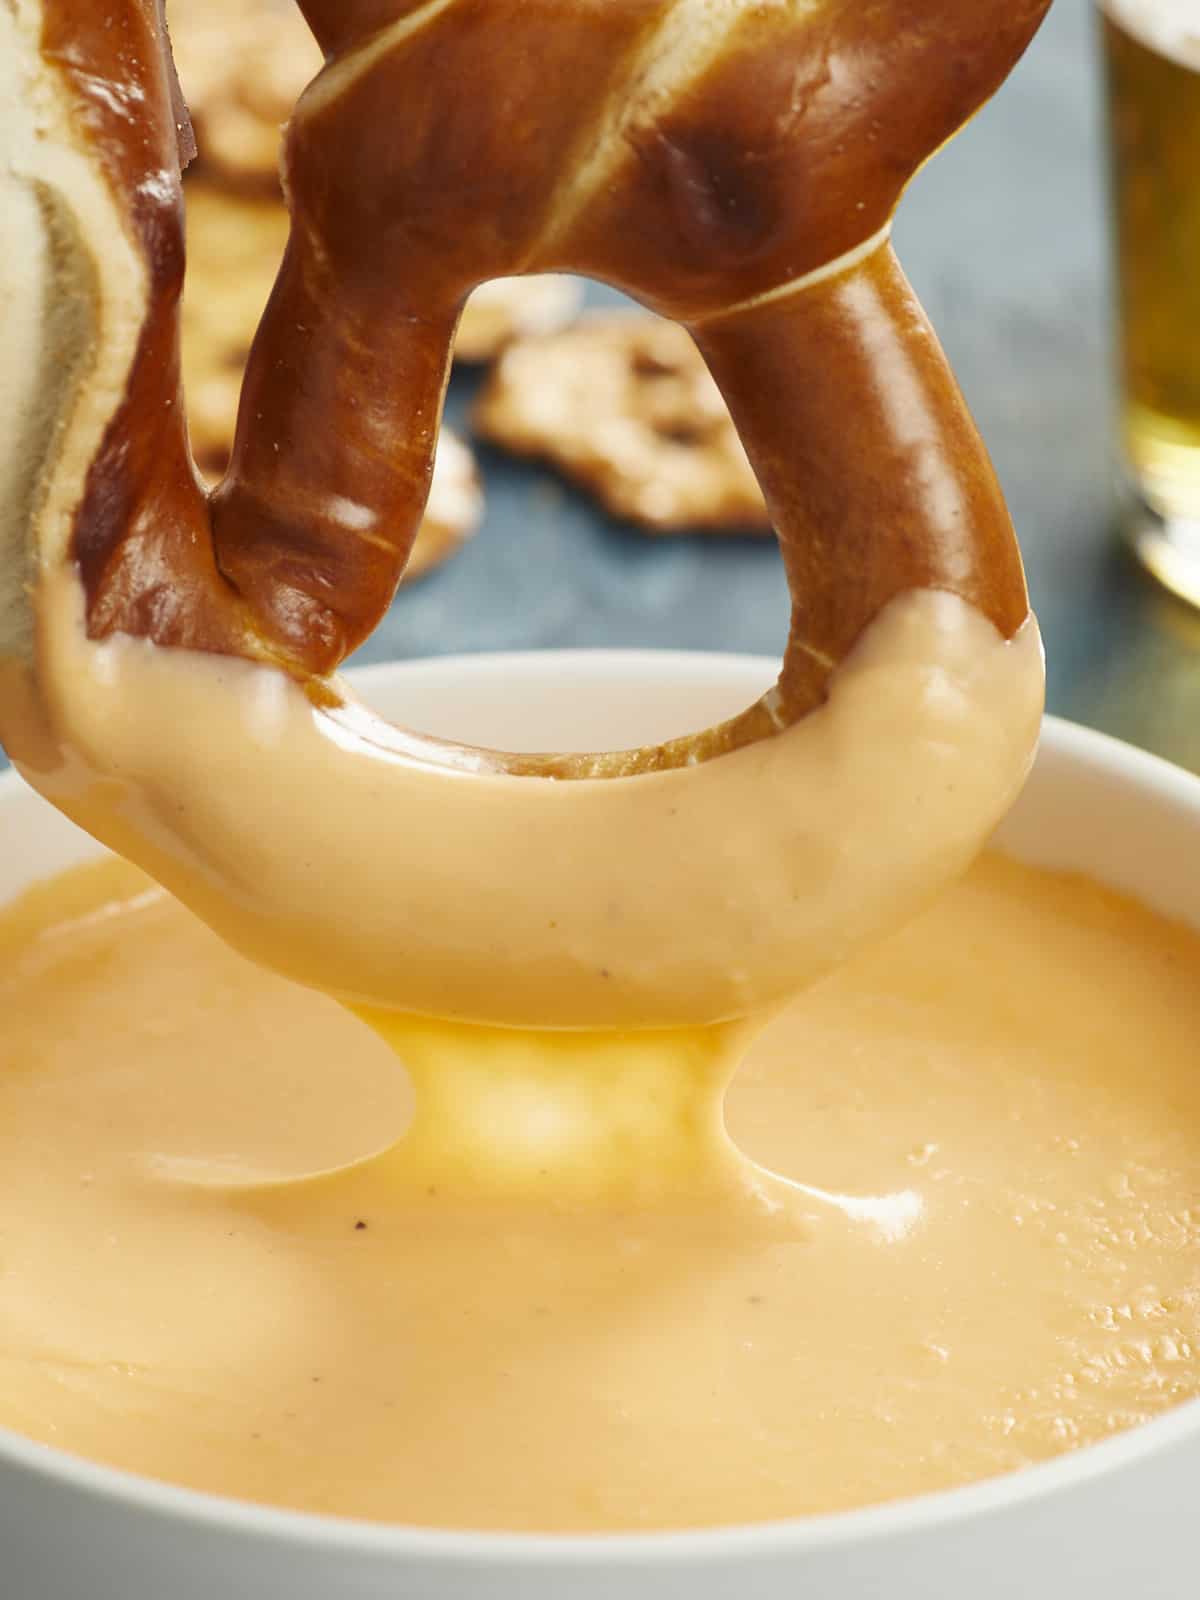 An extreme close up of a giant Bavarian soft pretzel that's just been dipped into a white bowl filled with melted cheese sauce, and an assortment of pretzels and a glass cup of beer are blurred in the background. 